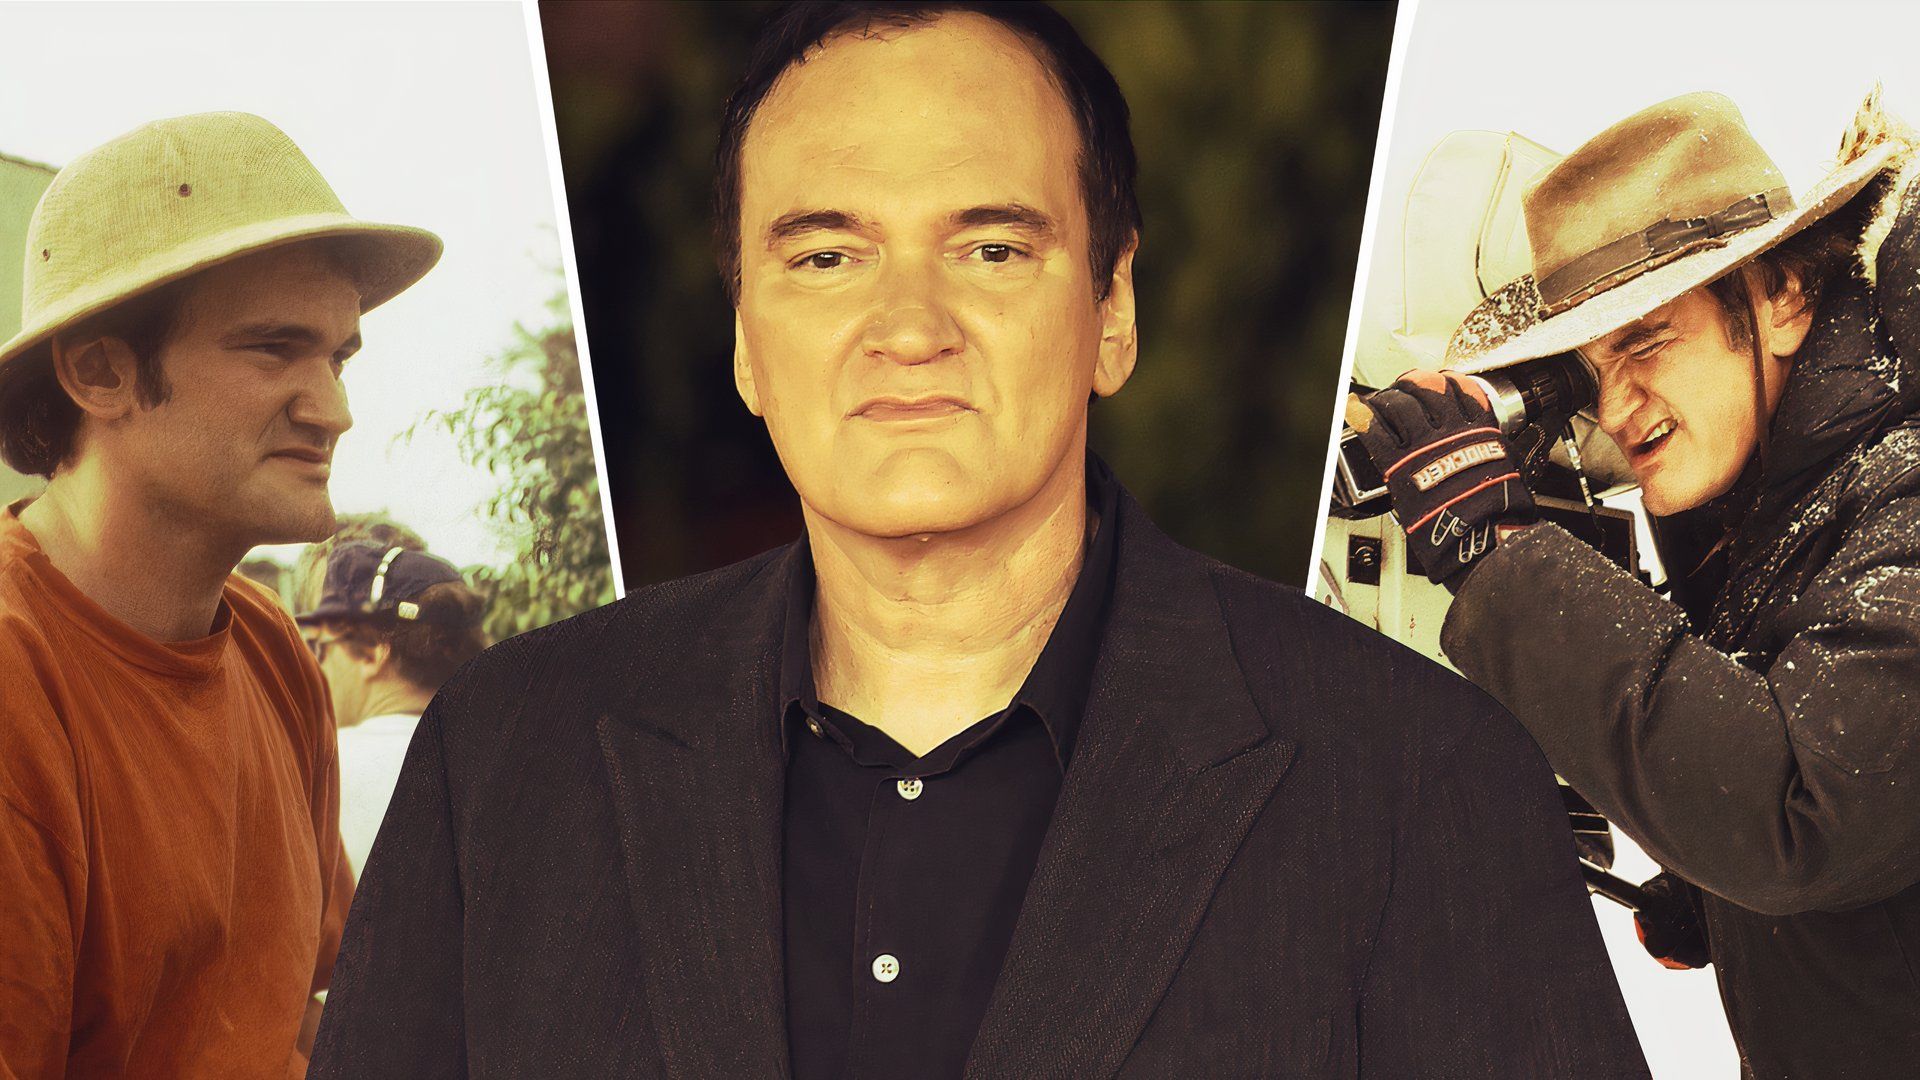 An edited image of Quentin Tarantino wearing a black suit and shirt, filming various movies behind the camera